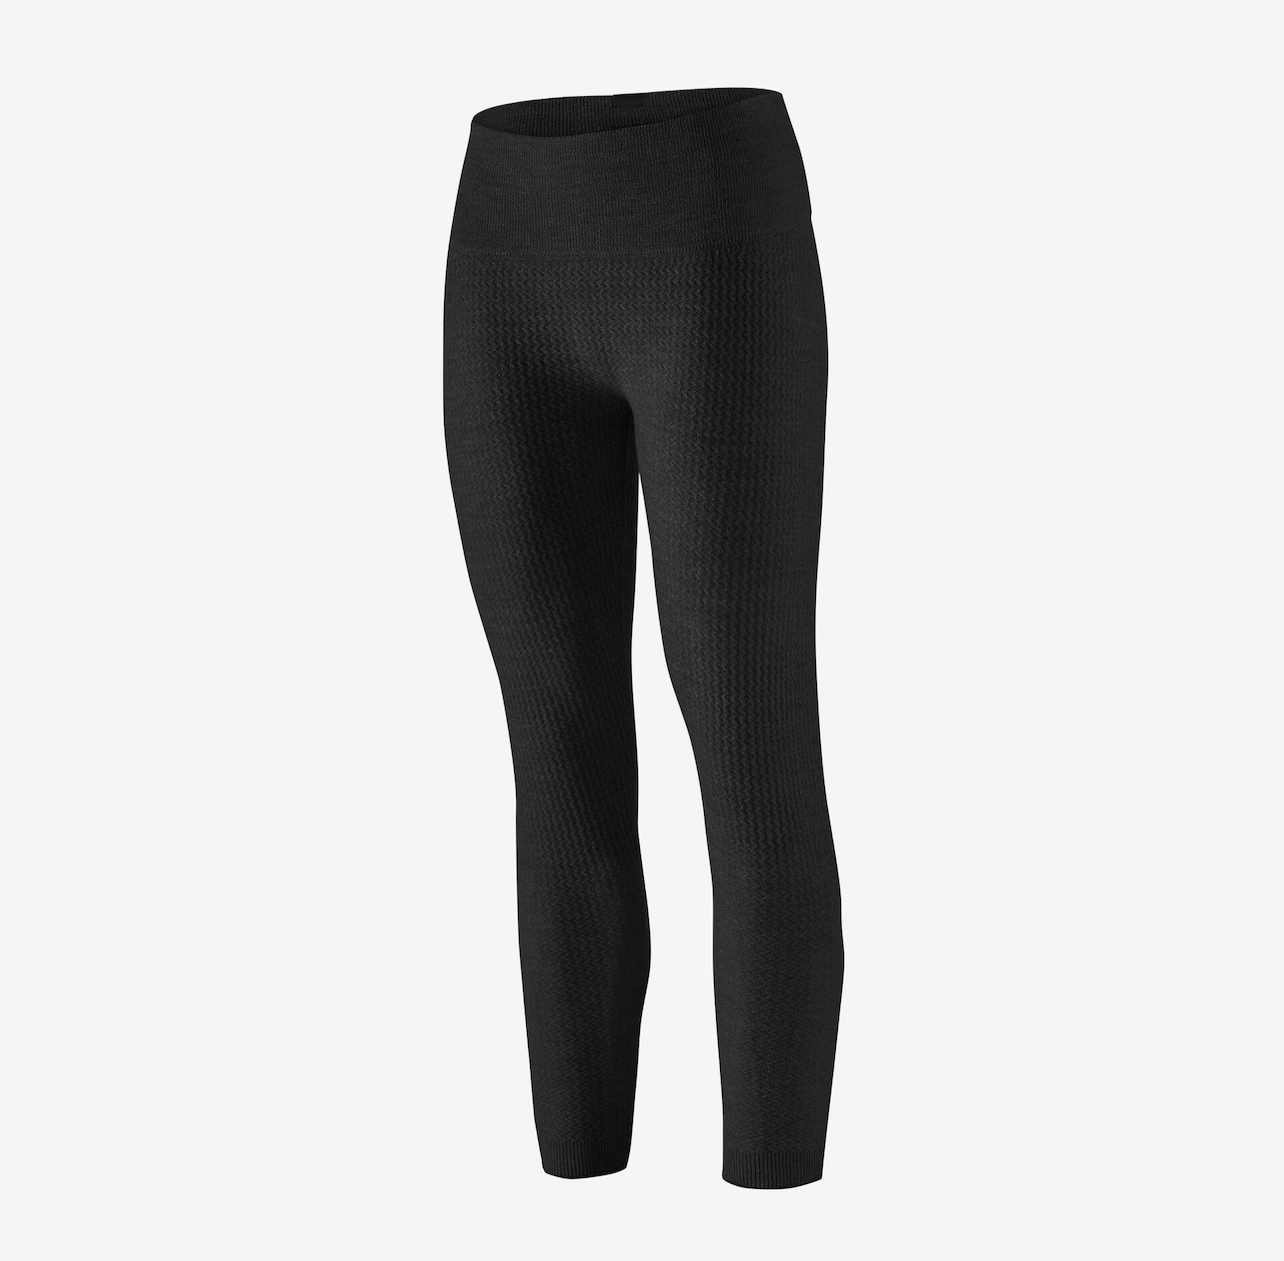 Patagonia W's Capilene Air Bottoms - Black - Small